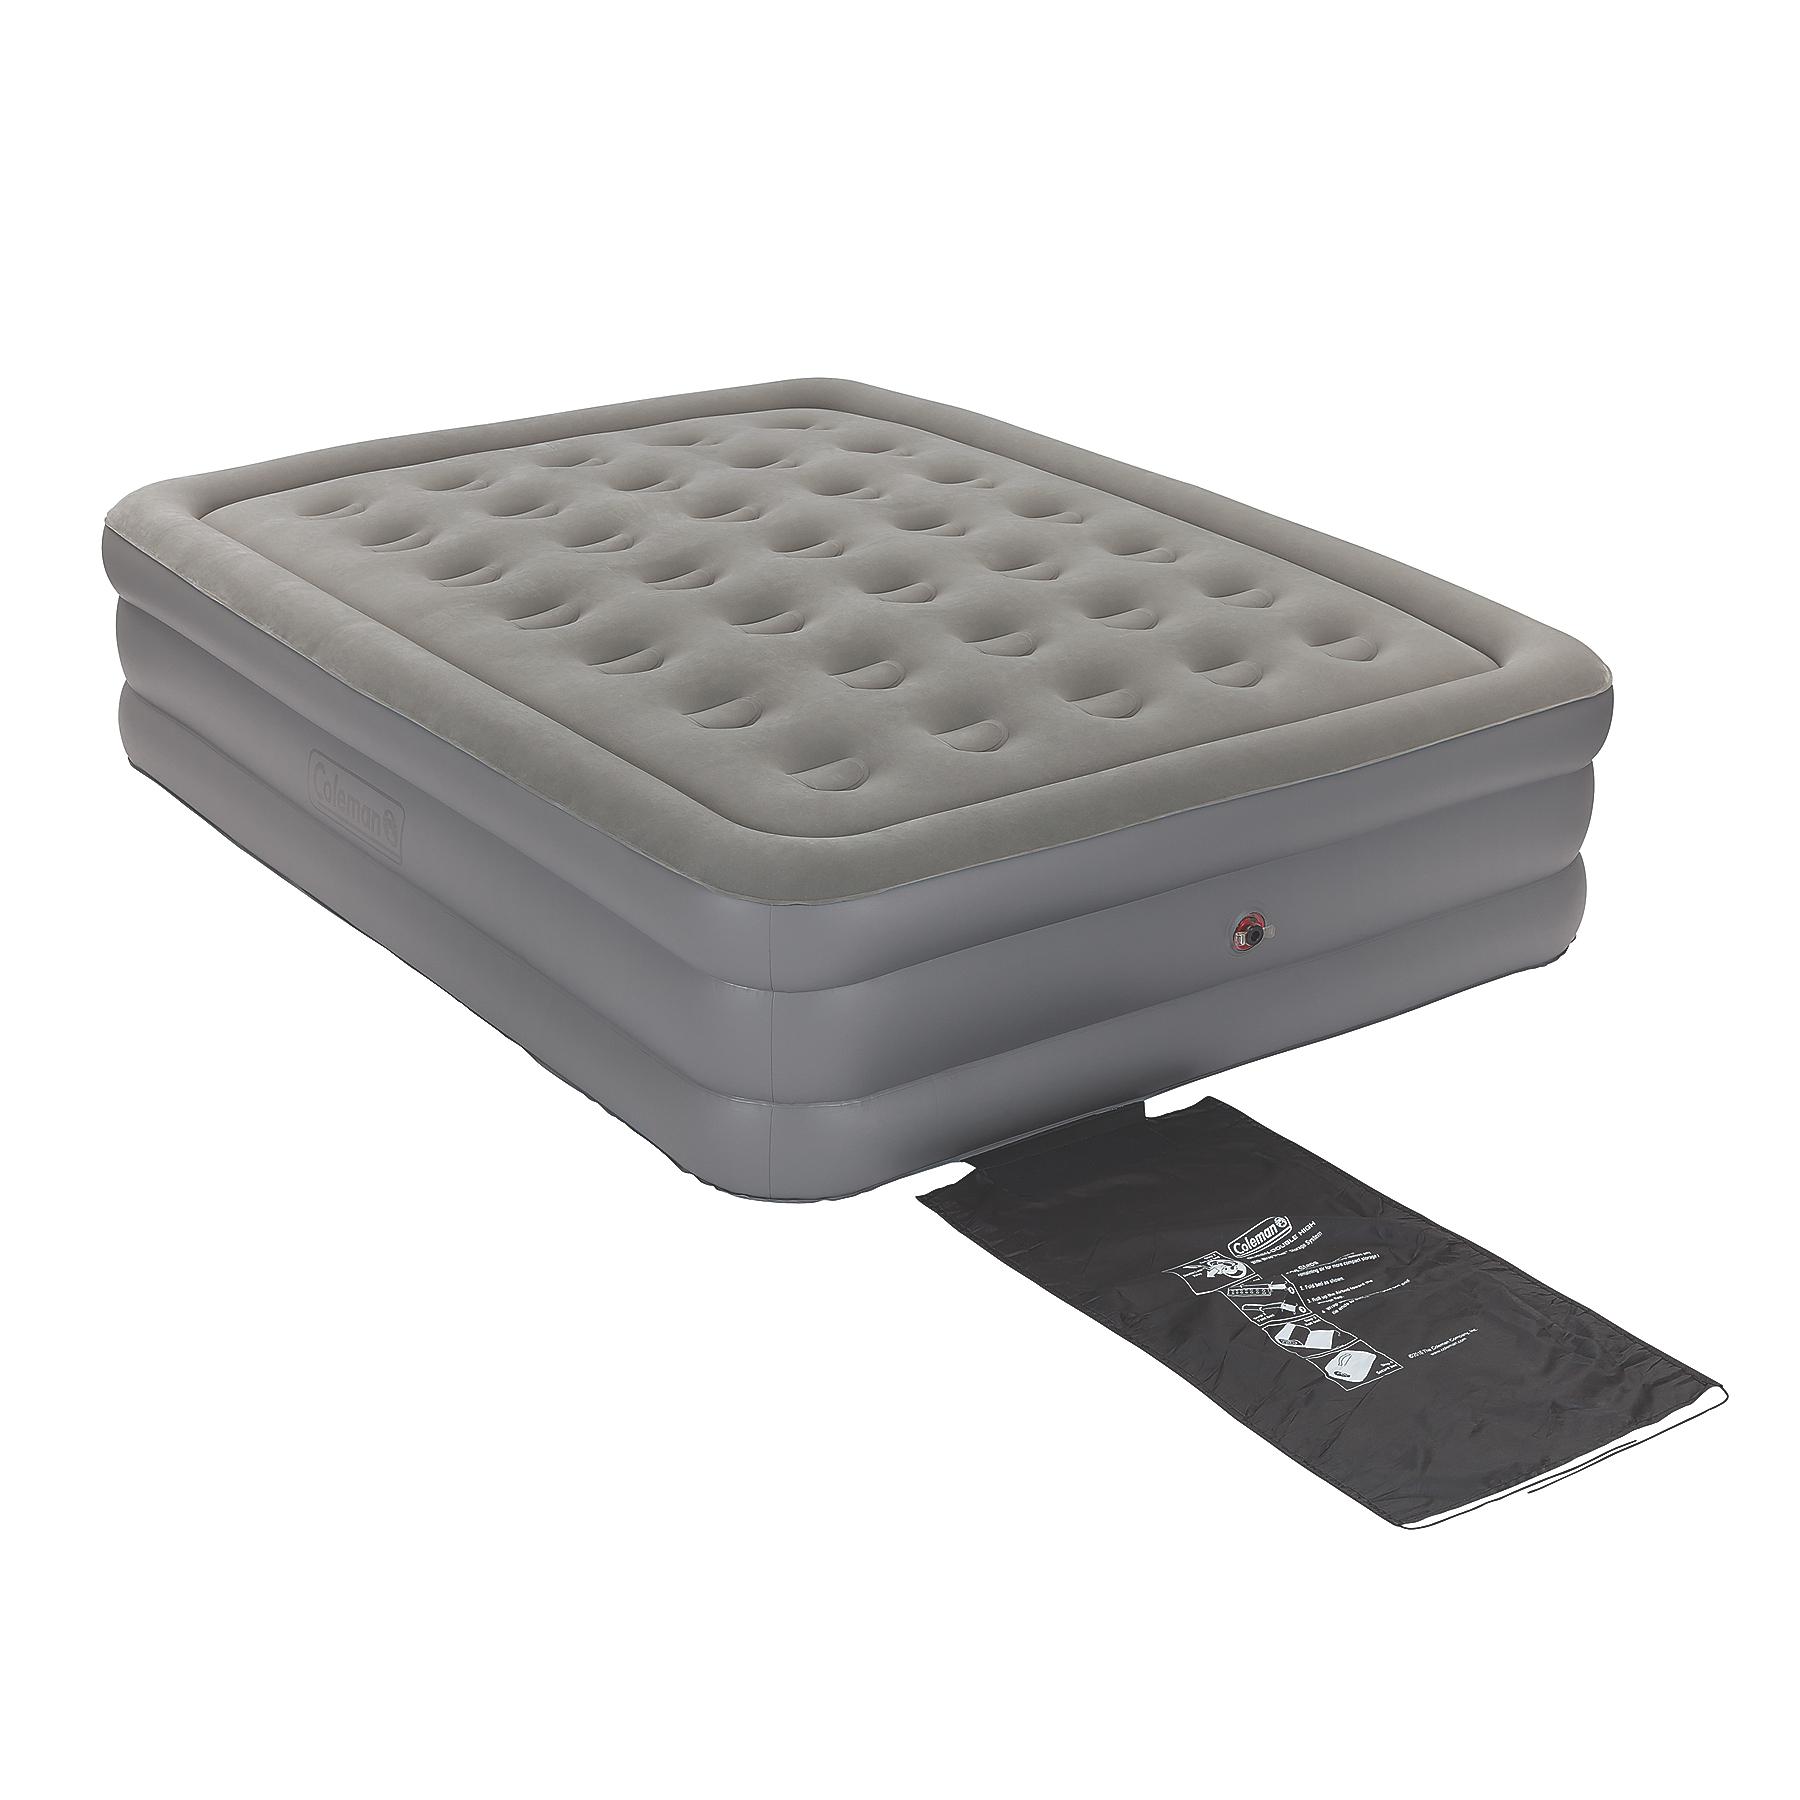 Coleman GuestRest Double-High Air Mattress, Pump Not Included, Queen - image 2 of 8